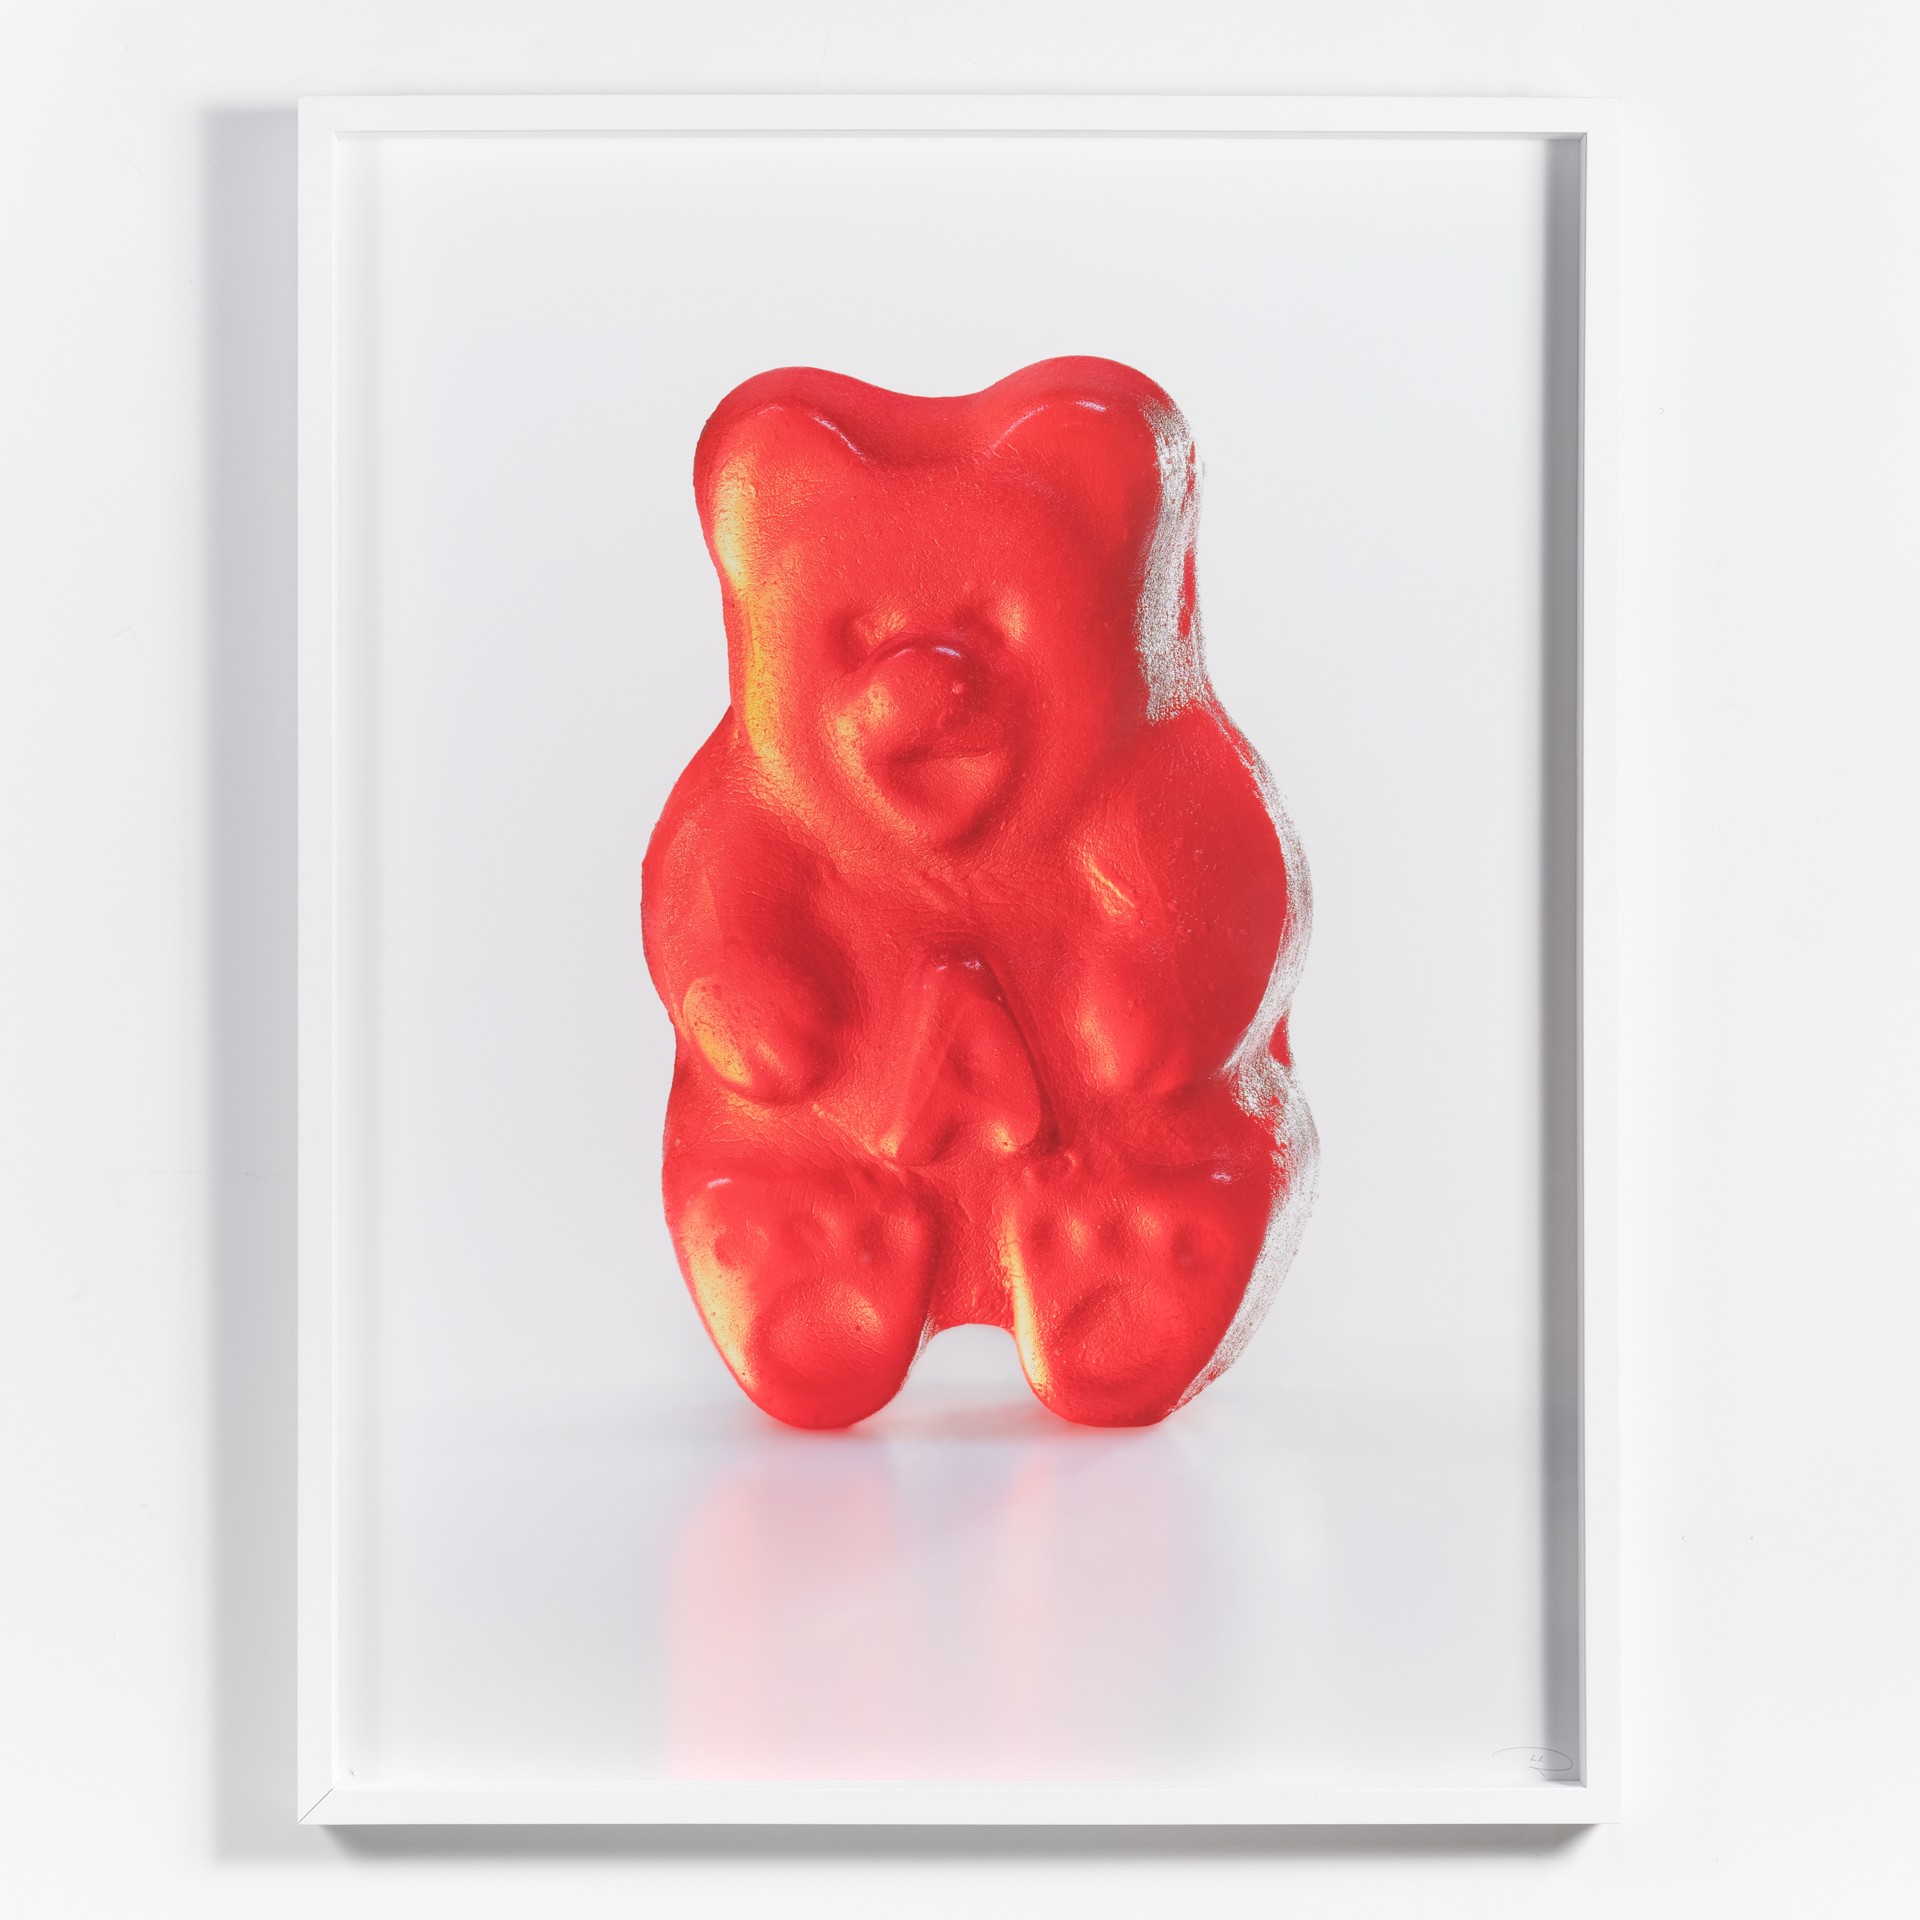 Gummy Bear - Red by Peter Andrew Lusztyk / Refined Sugar